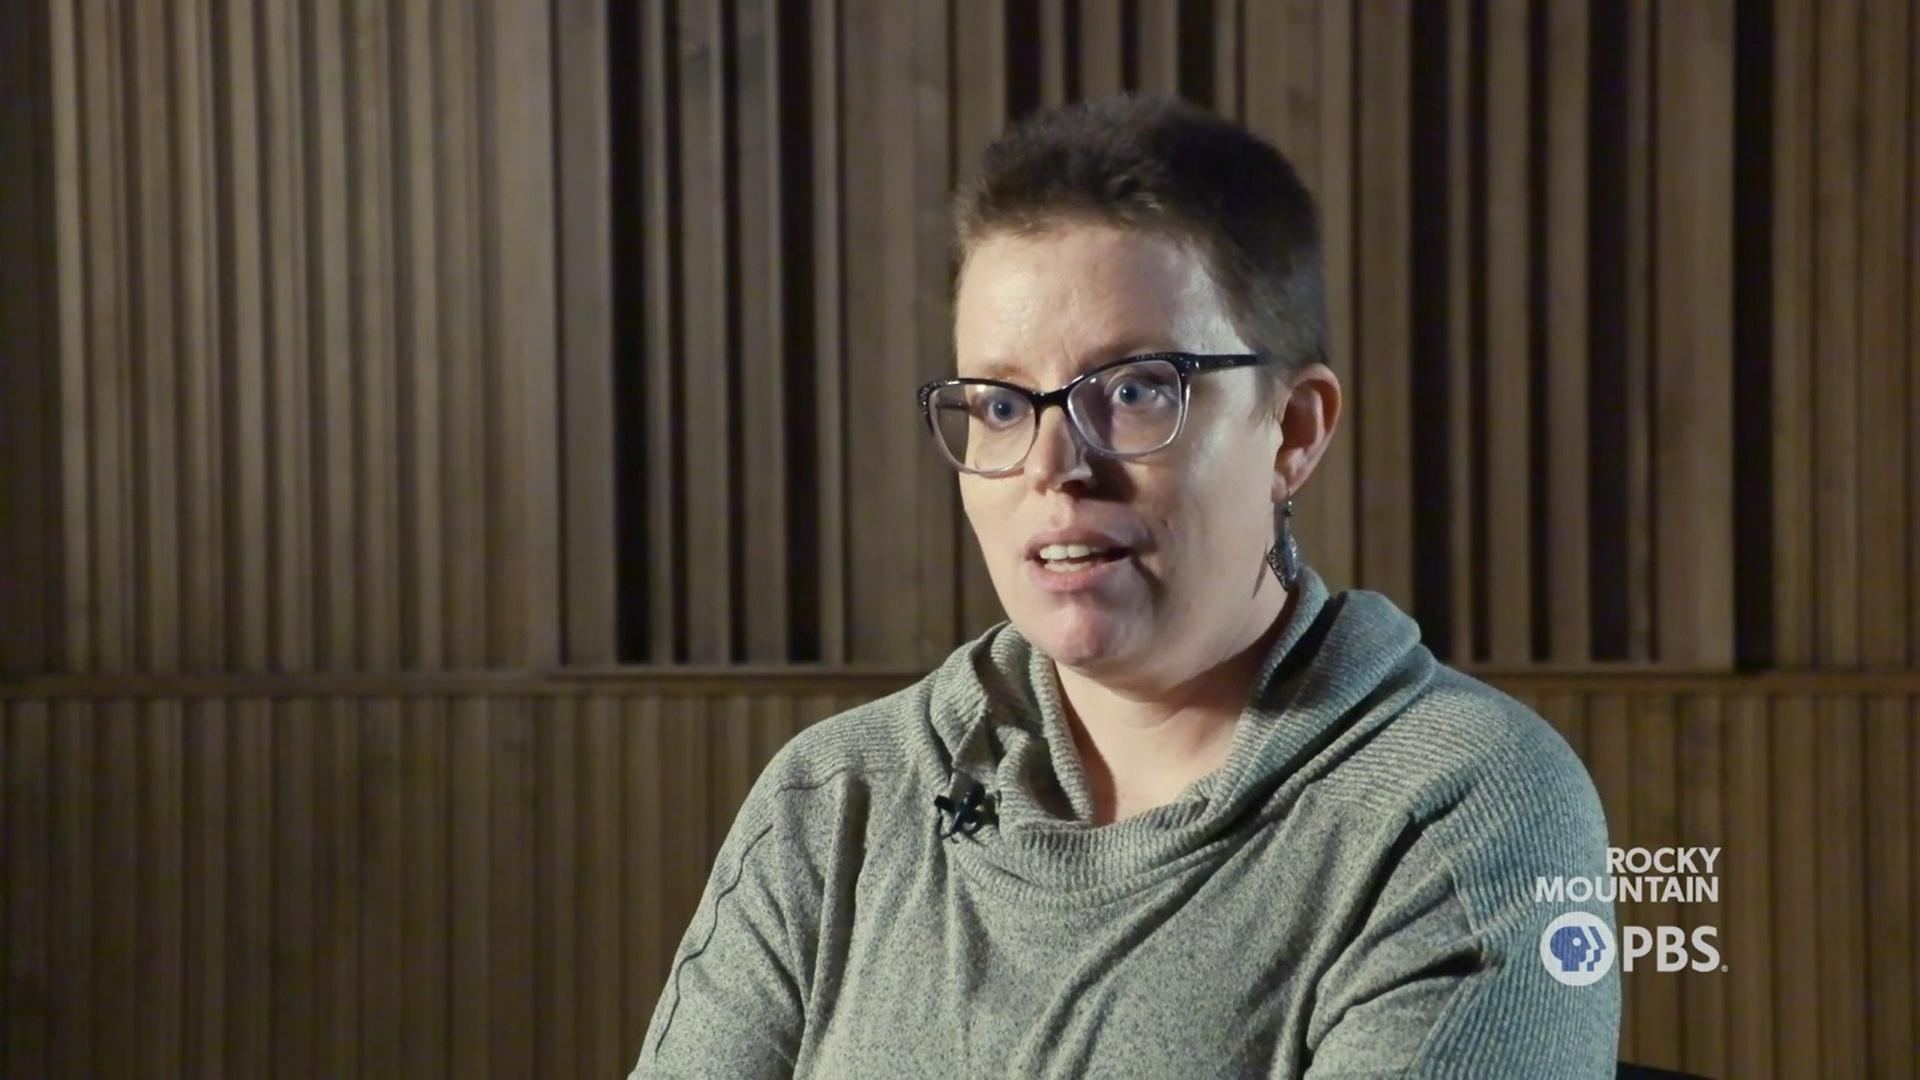 After receiving a grim cancer diagnosis, a Colorado mom worried her transgender son wouldn't receive the care she needs after she is gone. Thanks to a new Colorado policy, she no longer has those concerns.